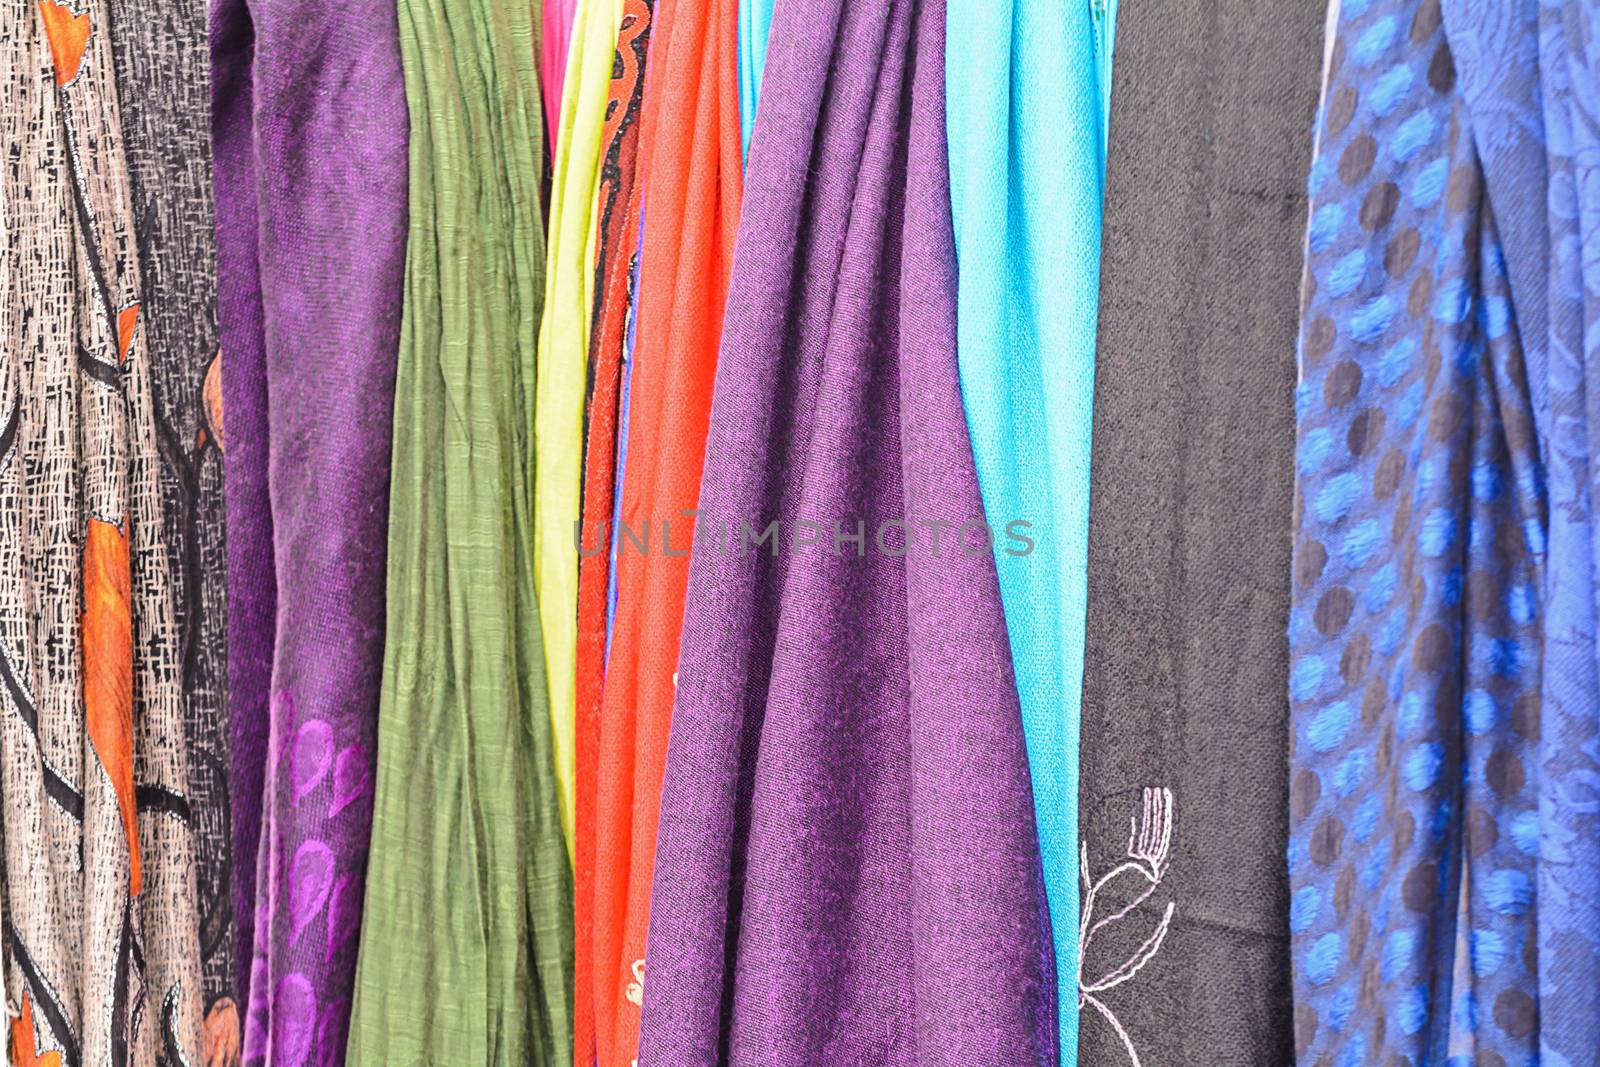 Colorful fabric textures hanging ,for a background.